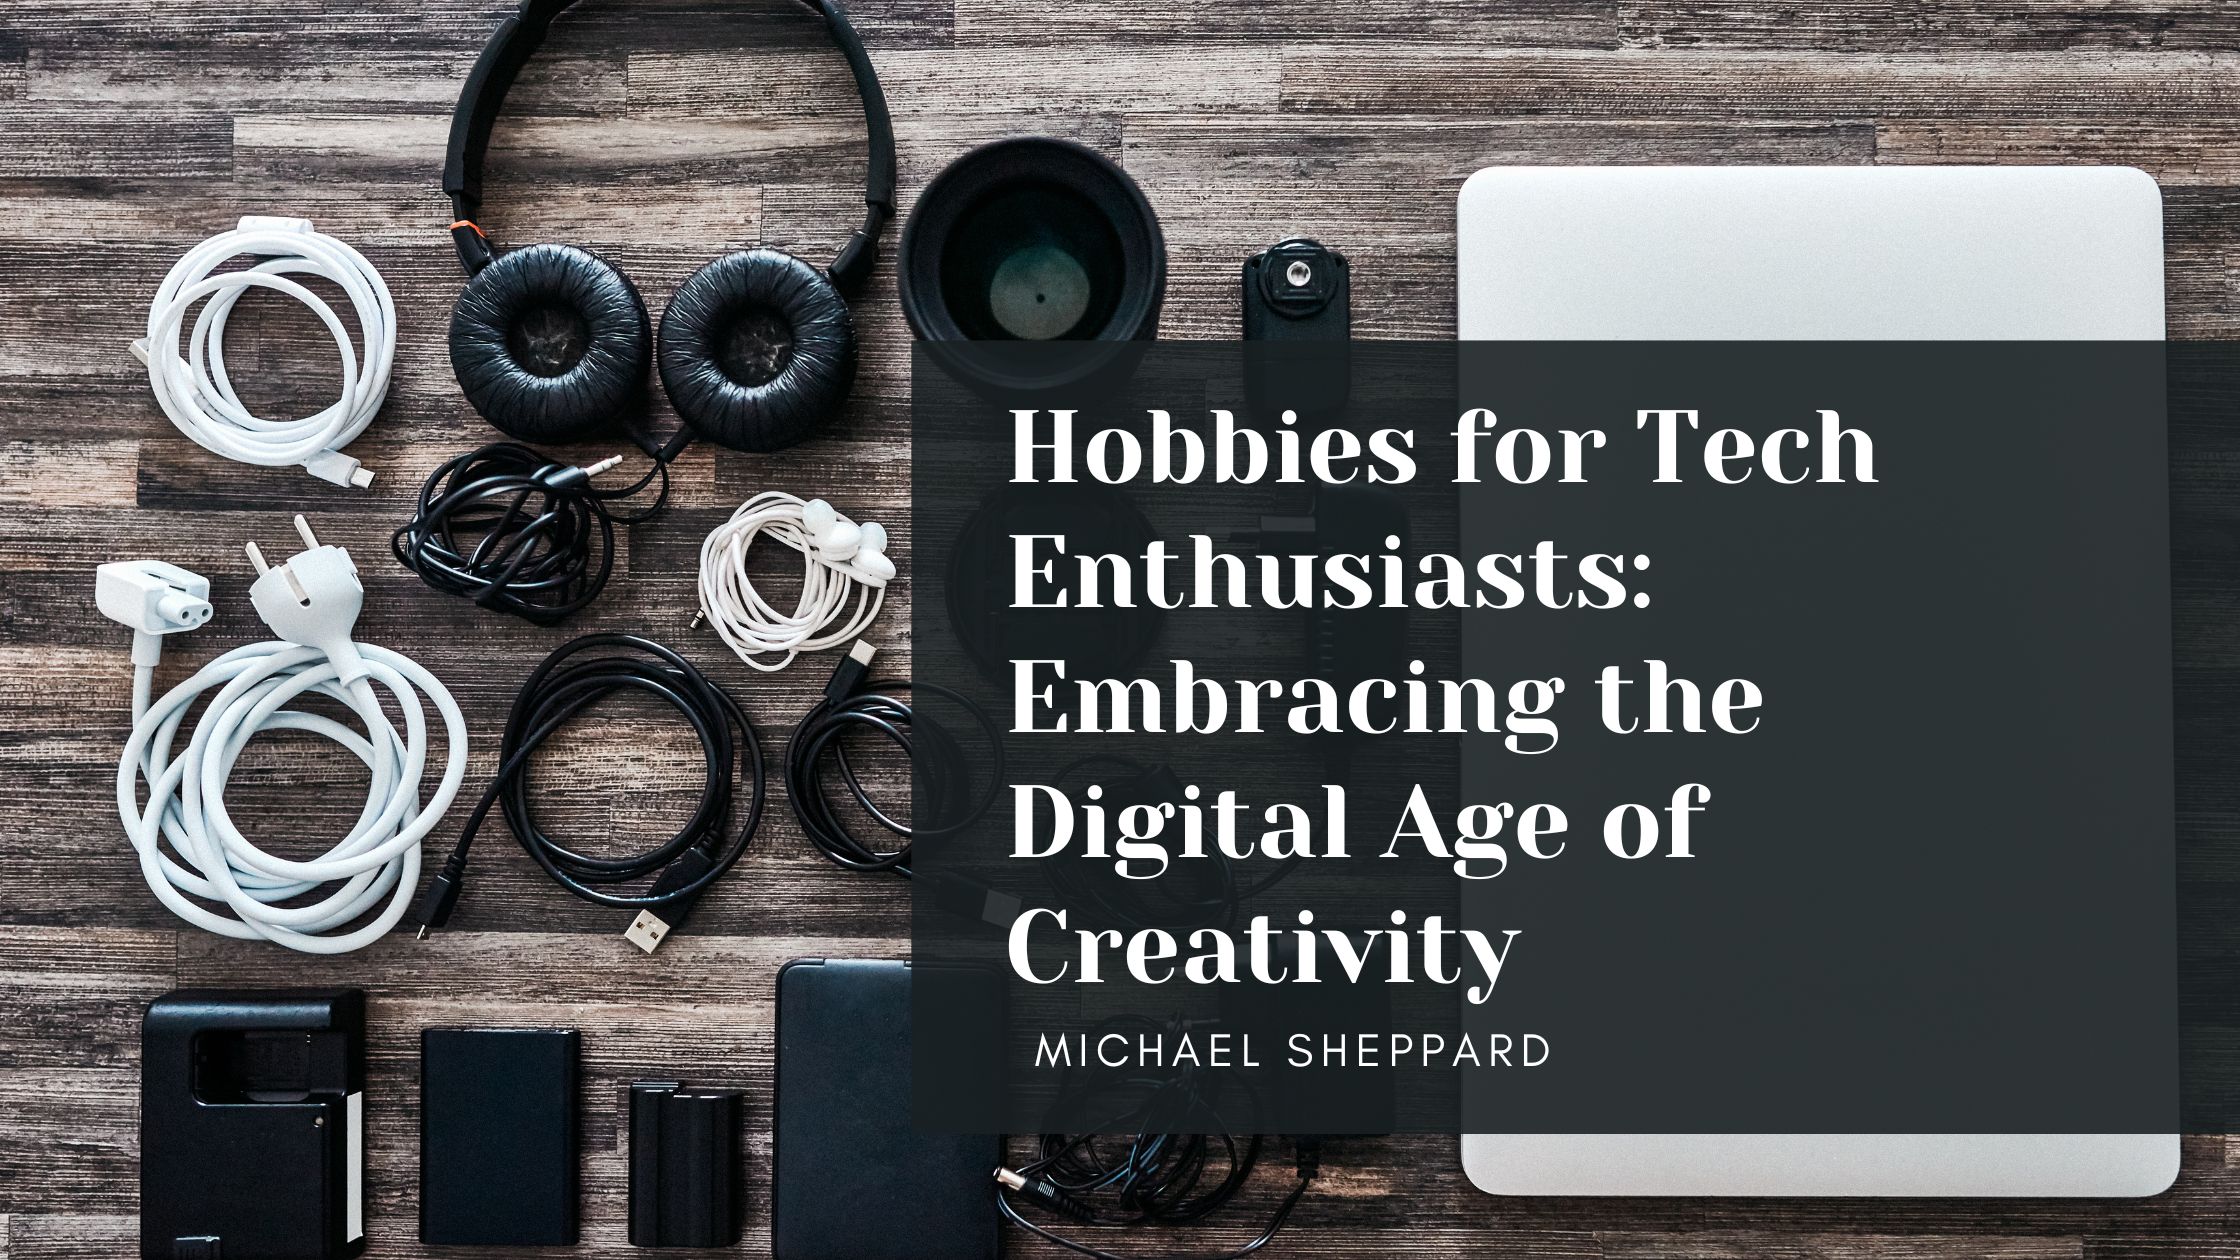 Hobbies for Tech Enthusiasts: Embracing the Digital Age of Creativity